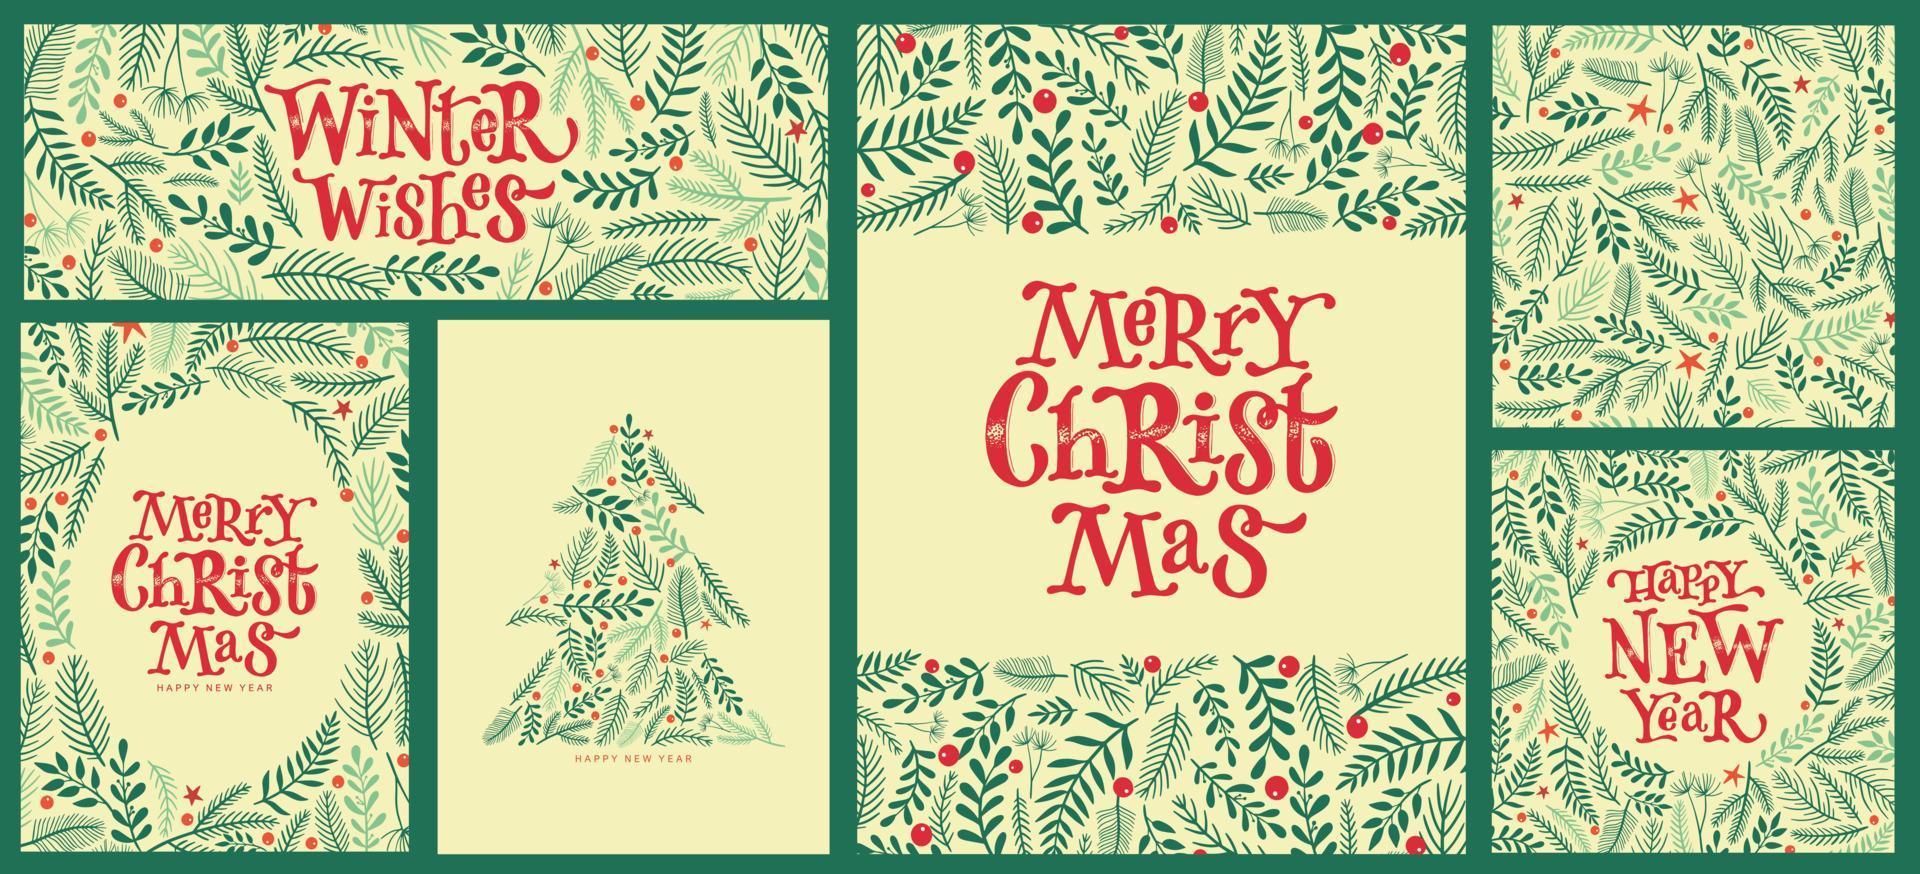 set of Christmas cards, posters, prints, invitations, banners, templates. Lettering quotes decorted with floral elements, pine tree branches, berries. EPS 10 vector